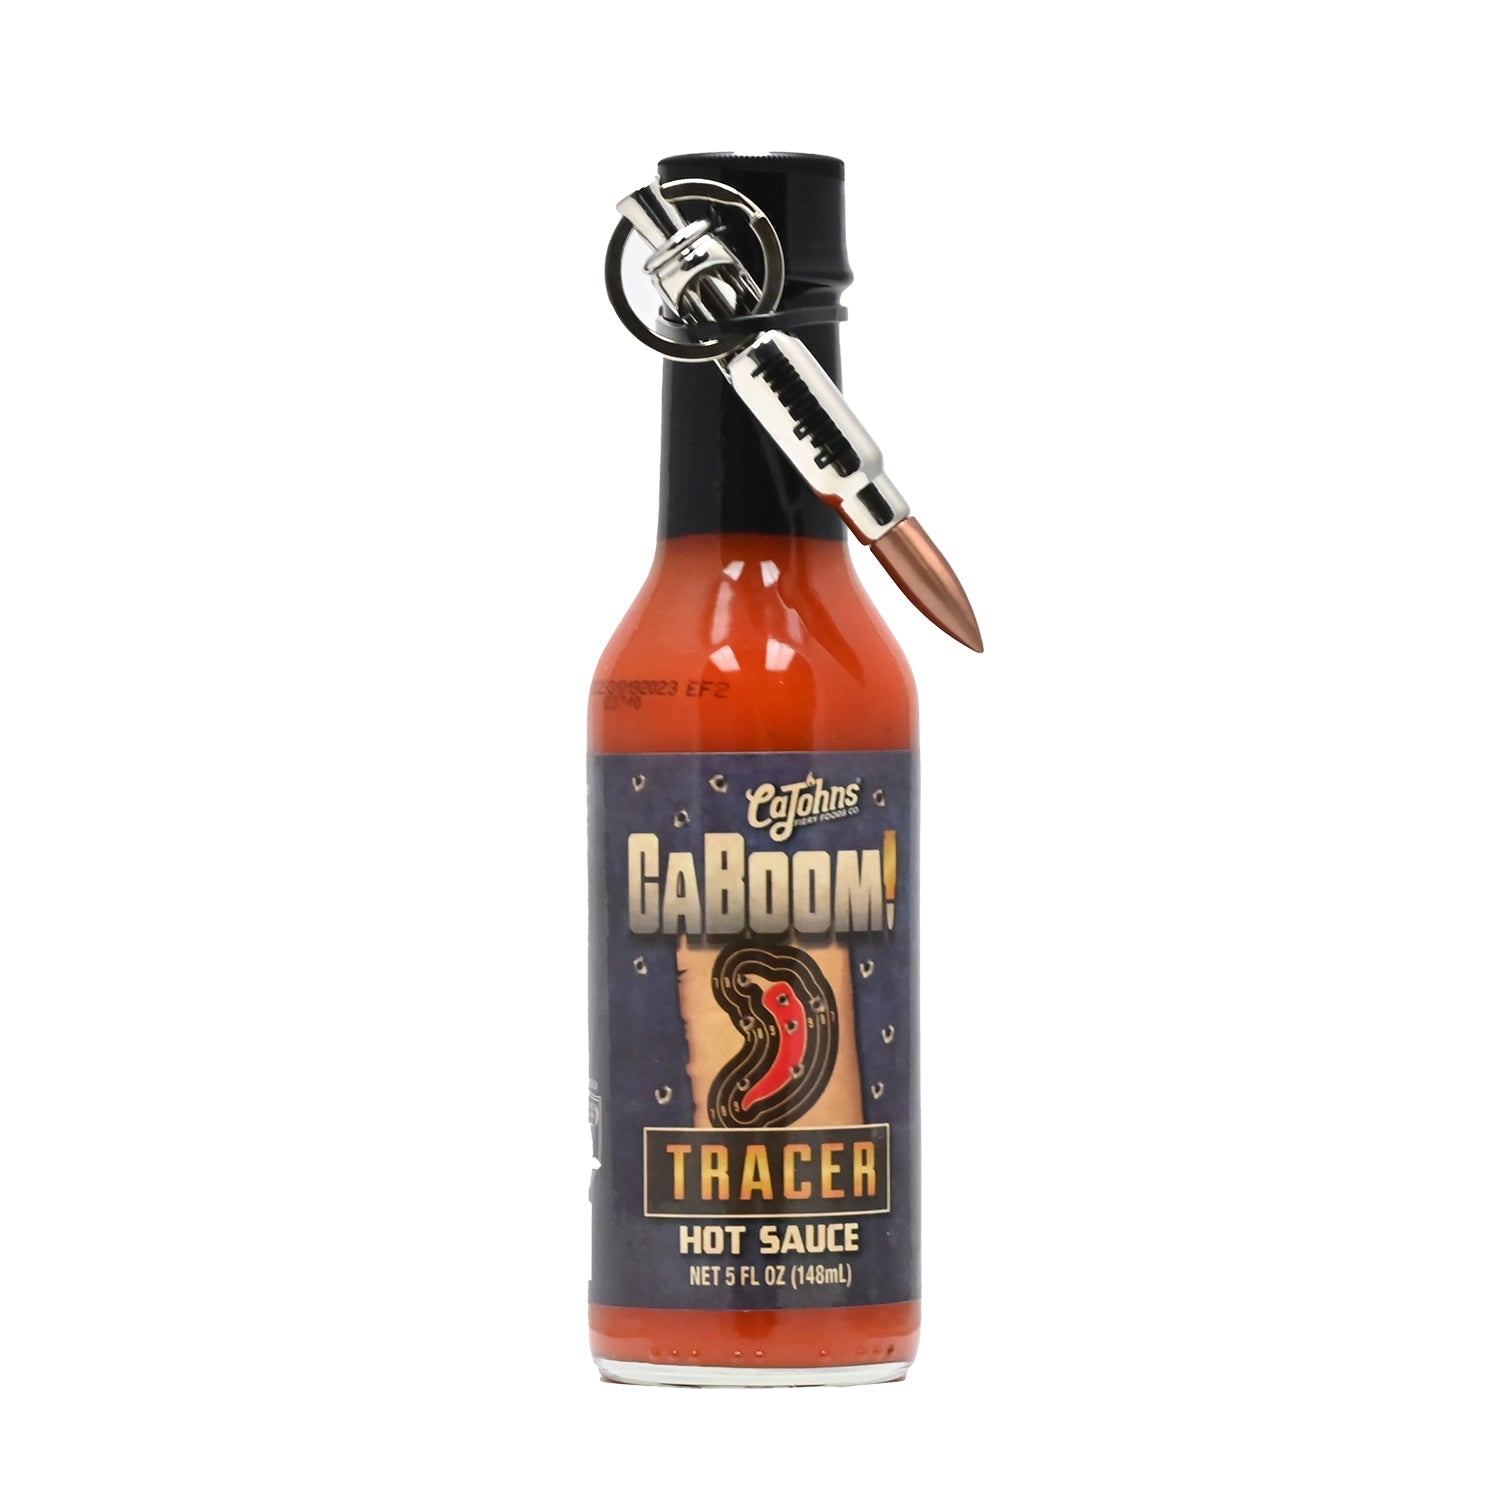 CaBoom! Tracer Hot Sauce with Bullet Keychain